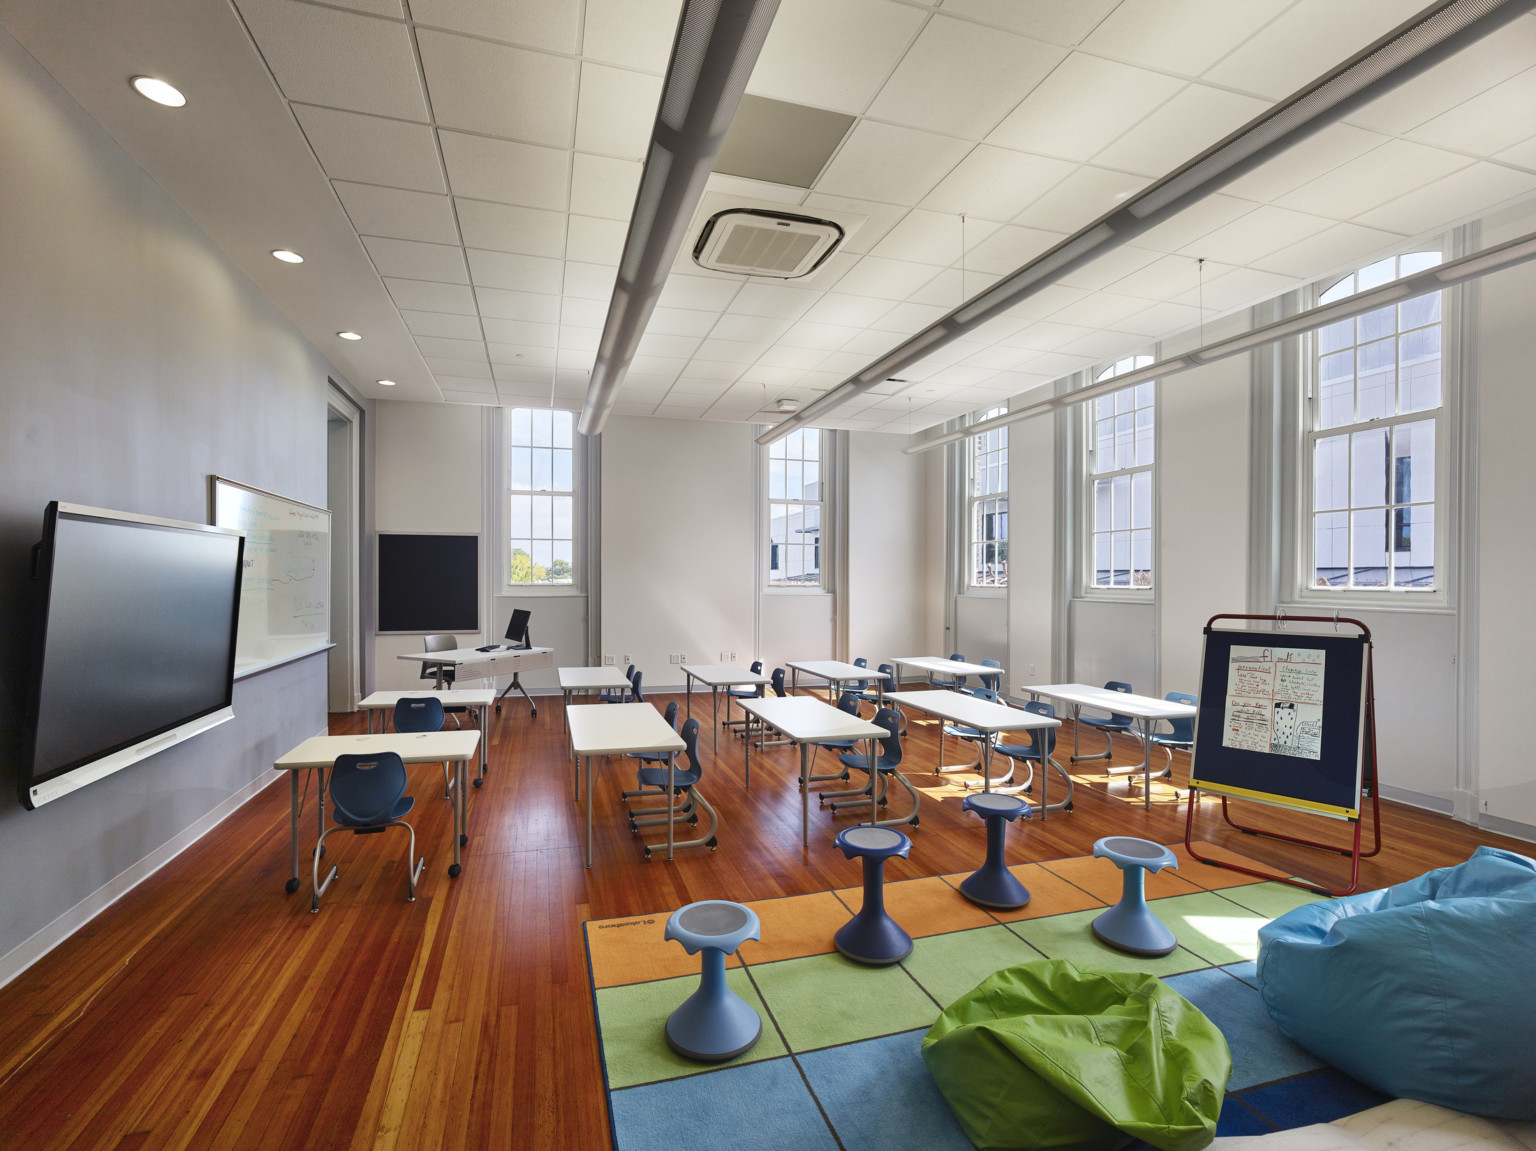 White classroom with hardwood floors and windows. Tables and chairs face screen. Nontraditional seating on colorful floor pad